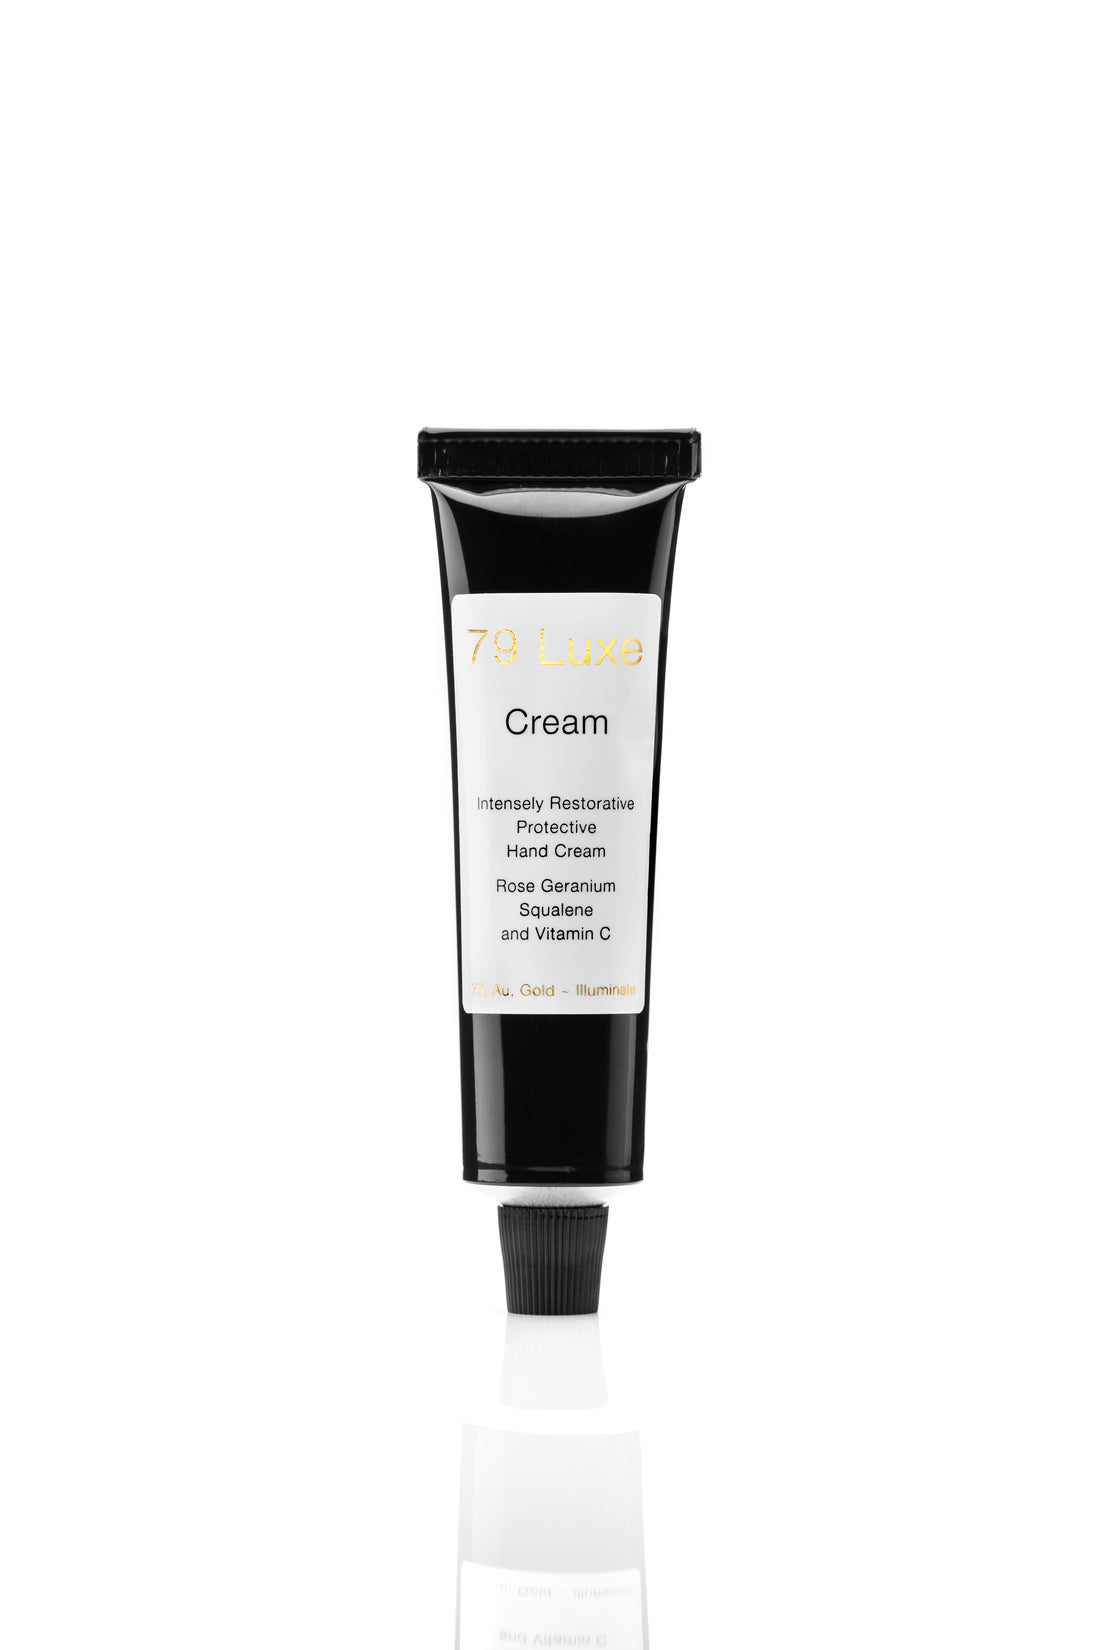 79 Luxe Intensely Restorative Protective Hand Cream 60ml